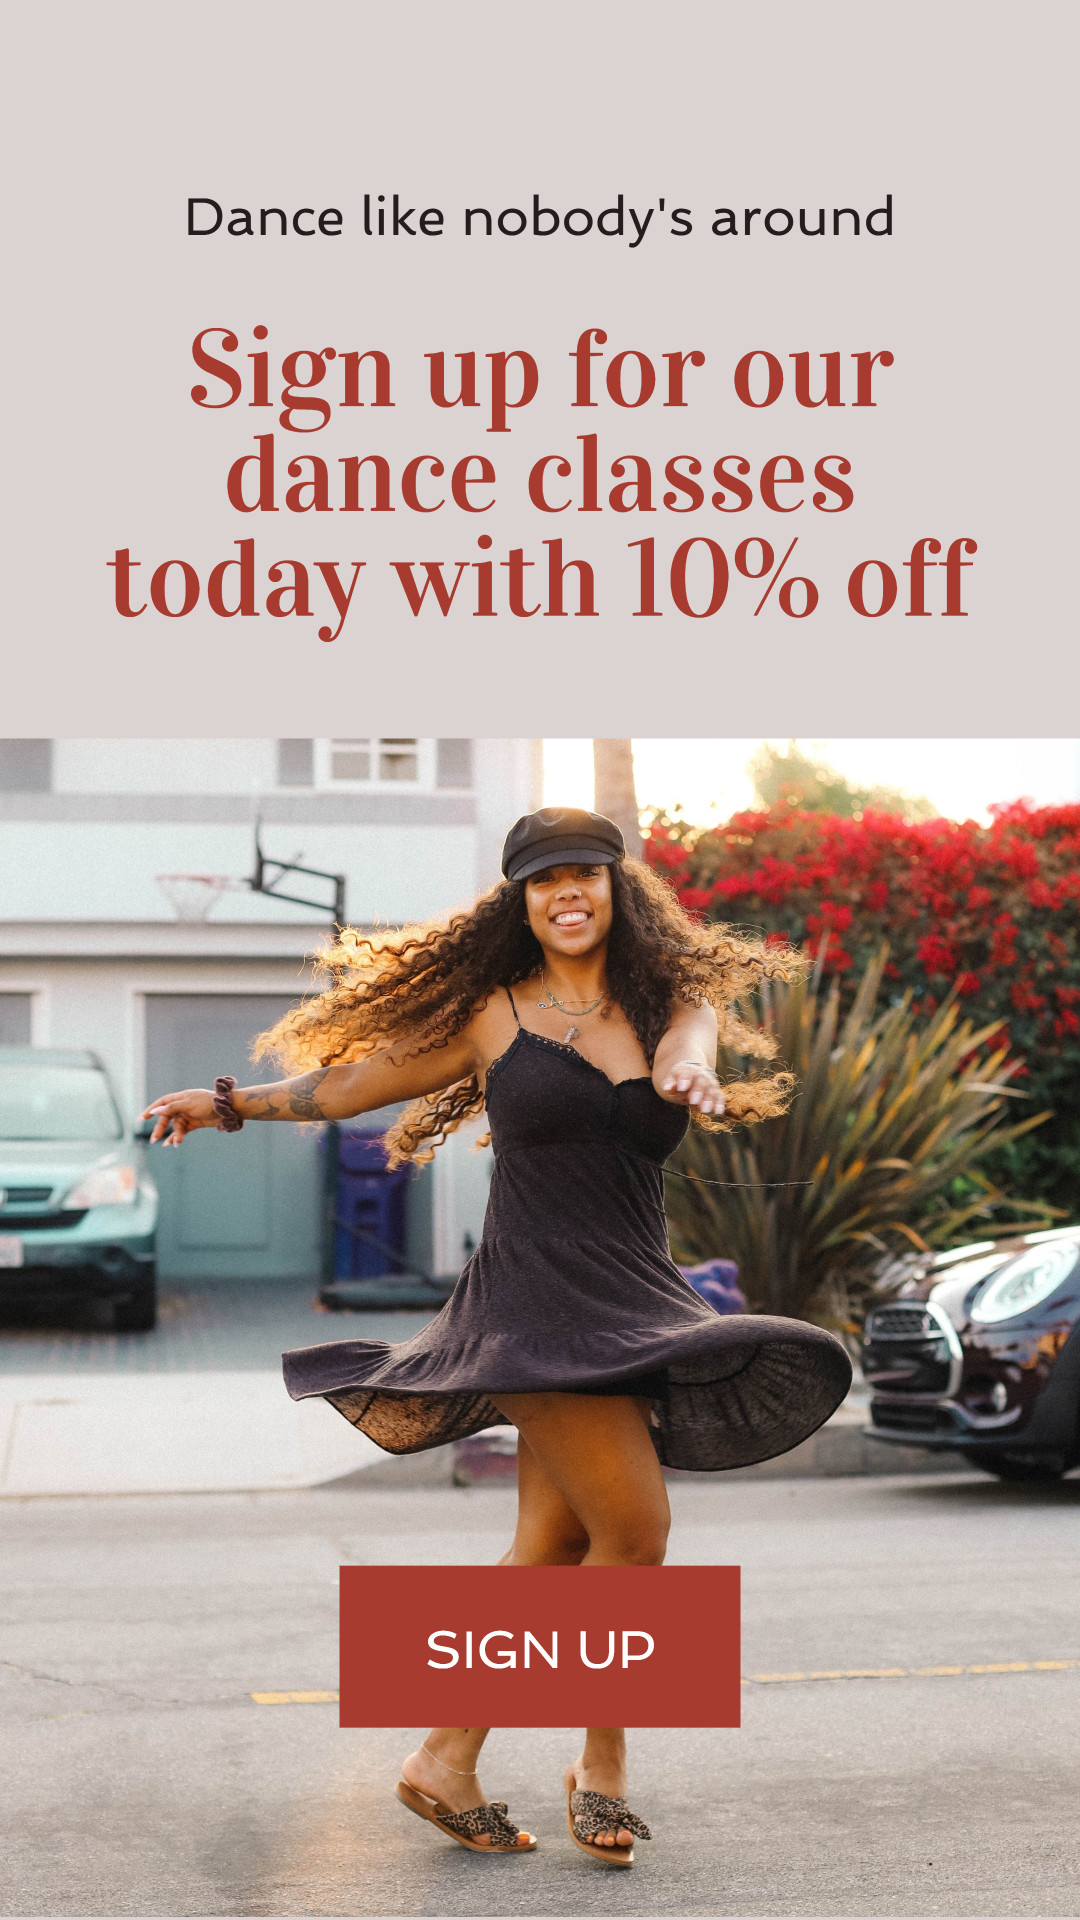 Dance Classes with 10% off